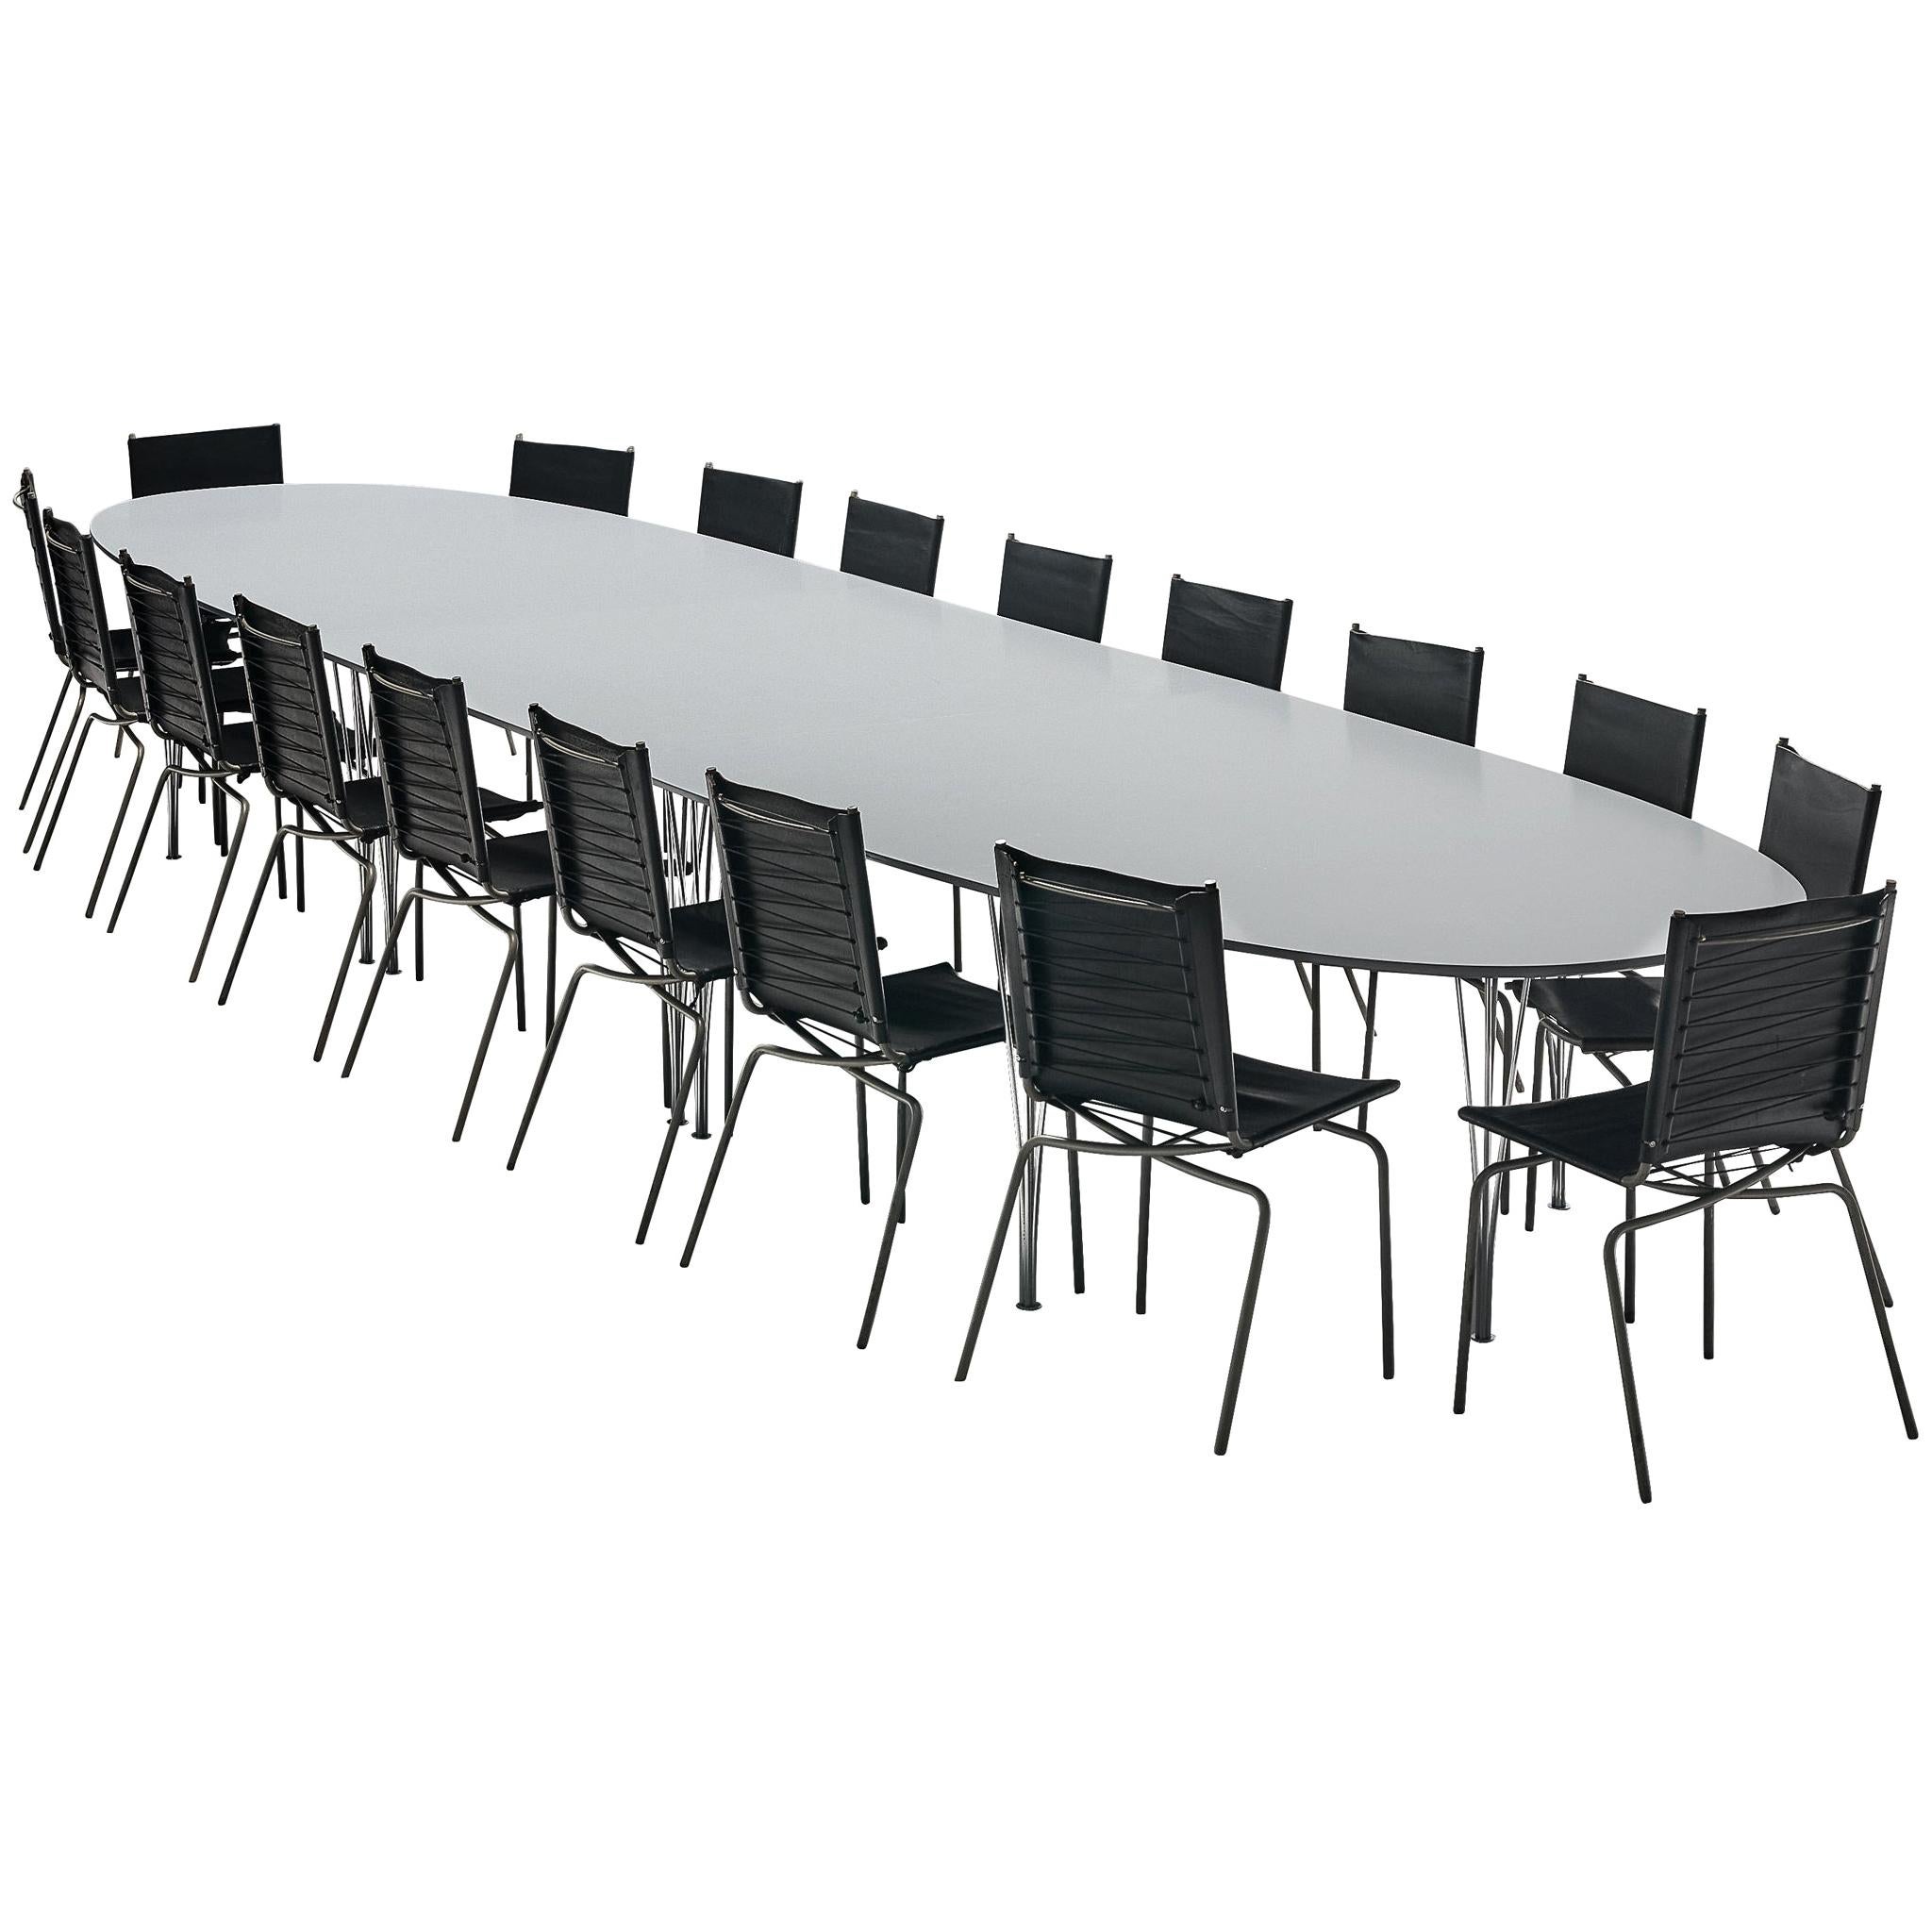 Hein & Mathsson Superellipse Conference Table and 18 van Severen Leather Chairs